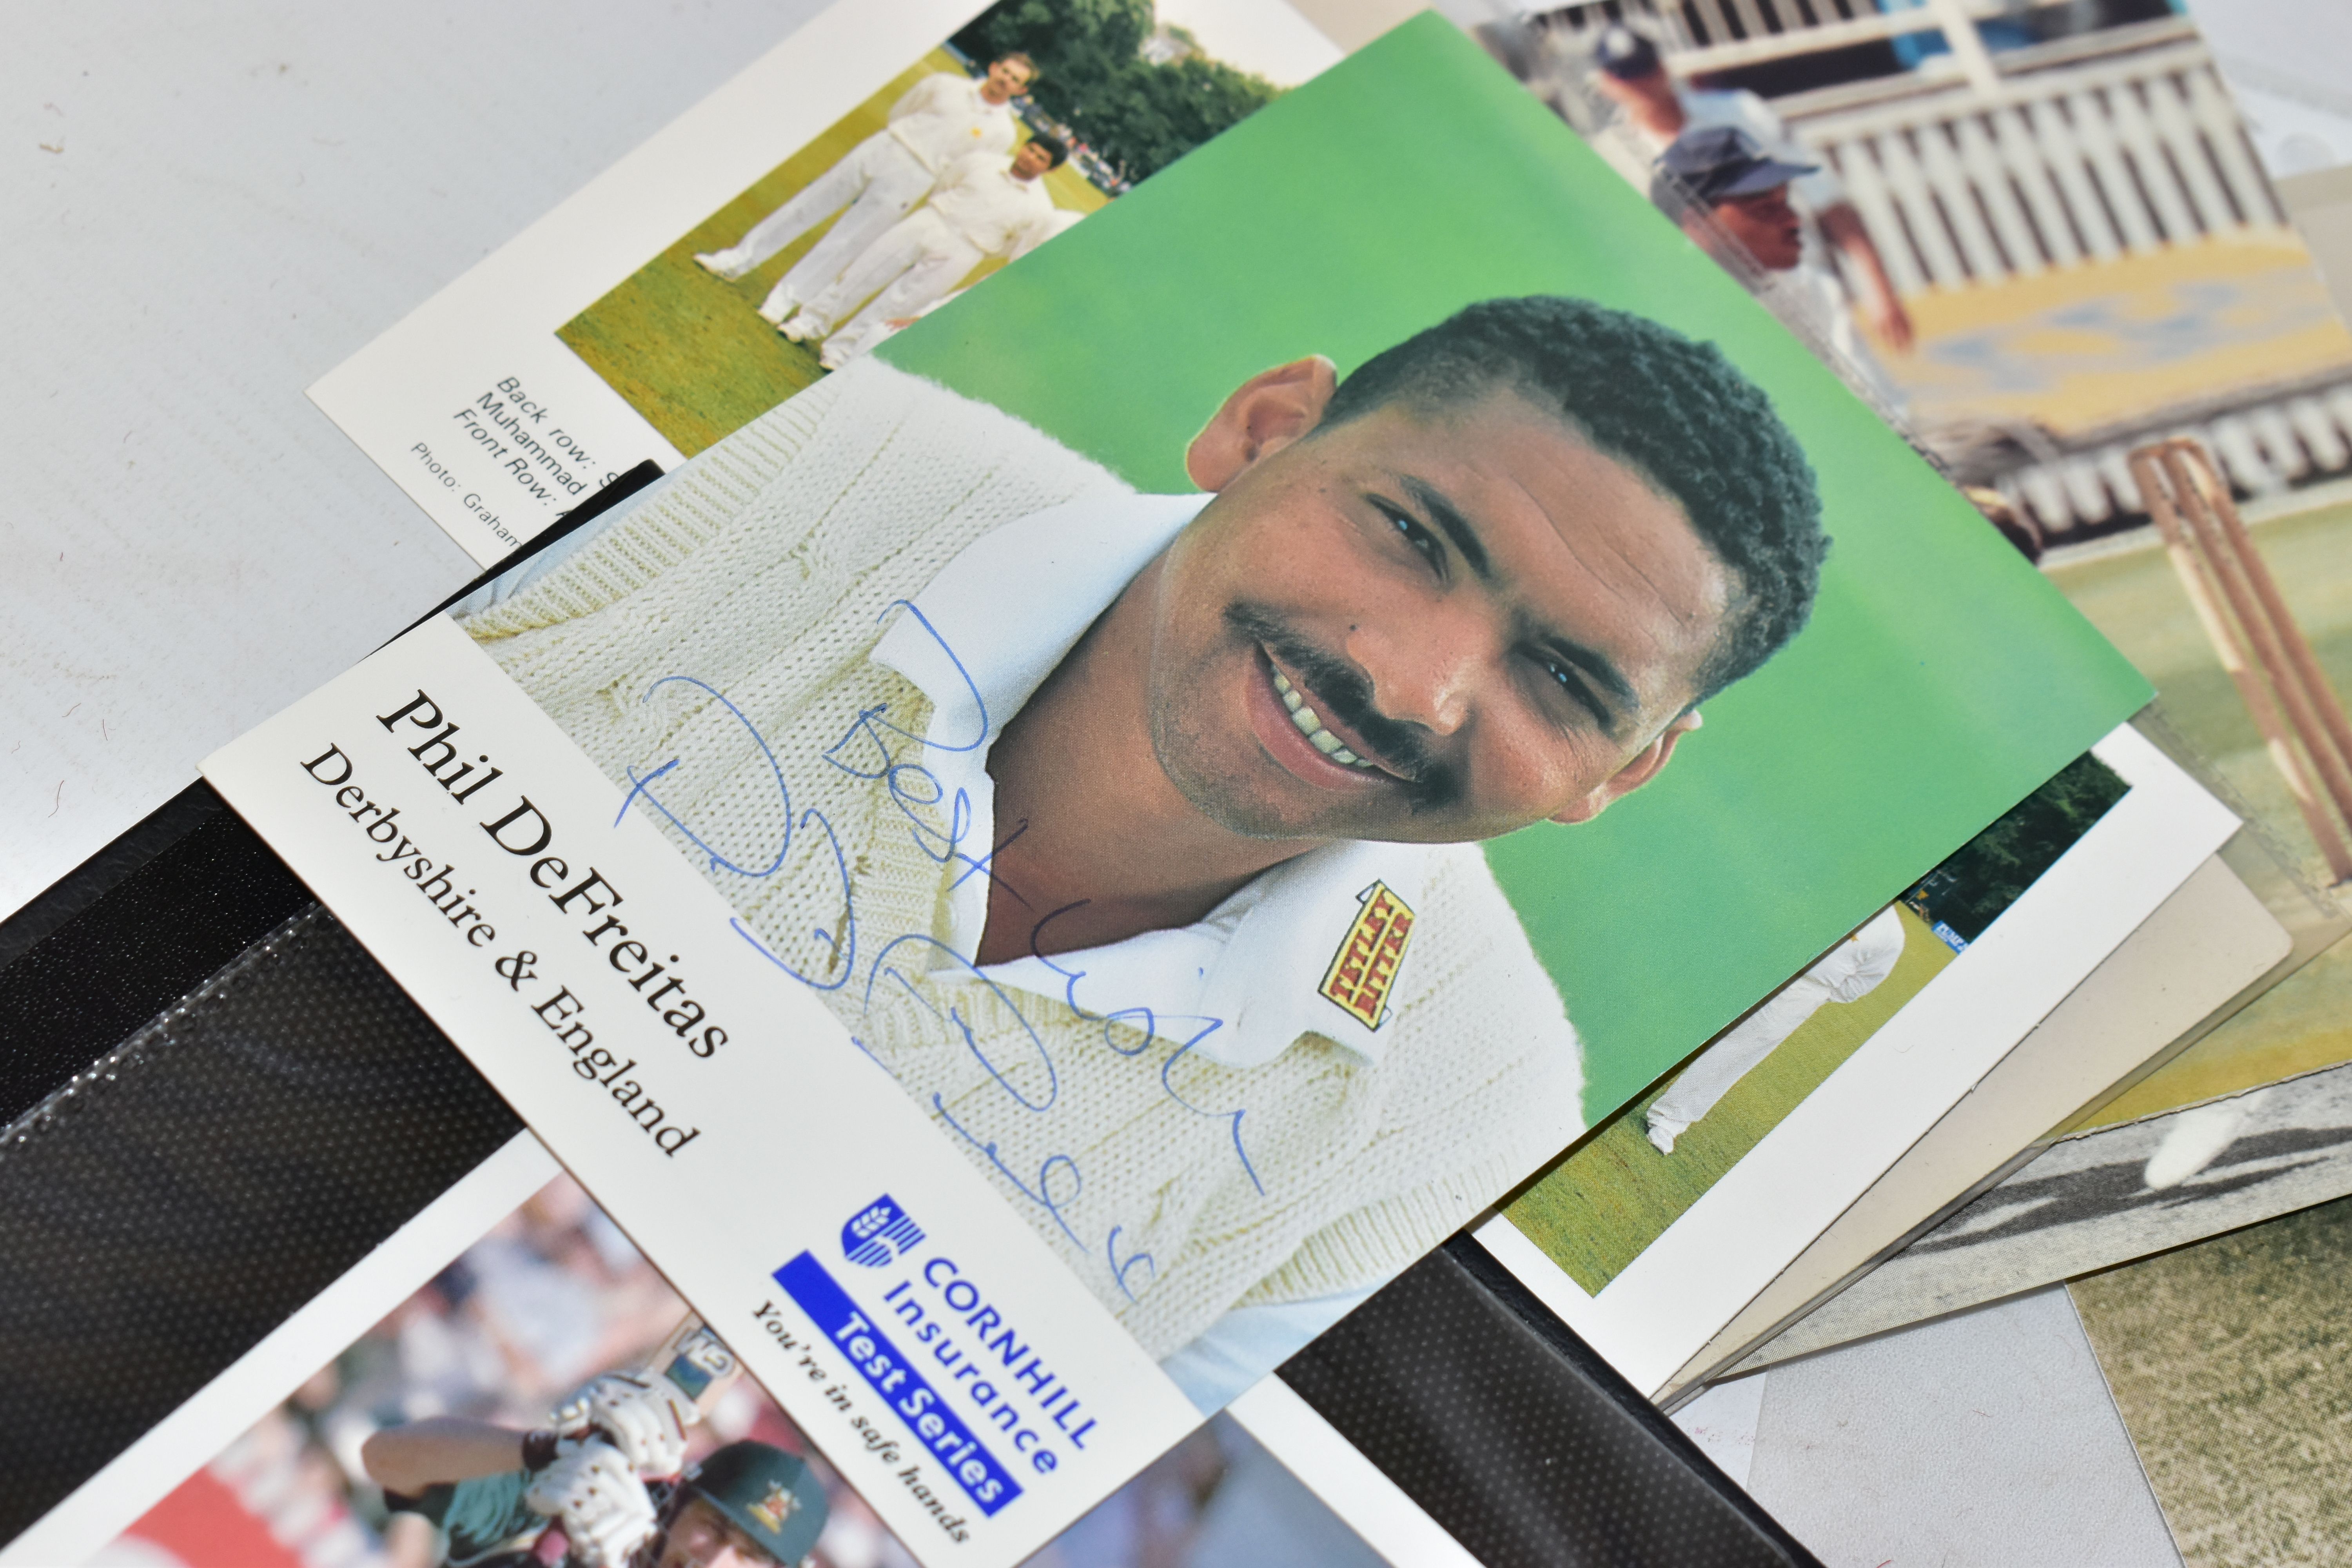 CRICKET - SIGNED PHOTOGRAPHS, a collection of 150+ Cricket Photographs, mostly signed and - Image 5 of 7